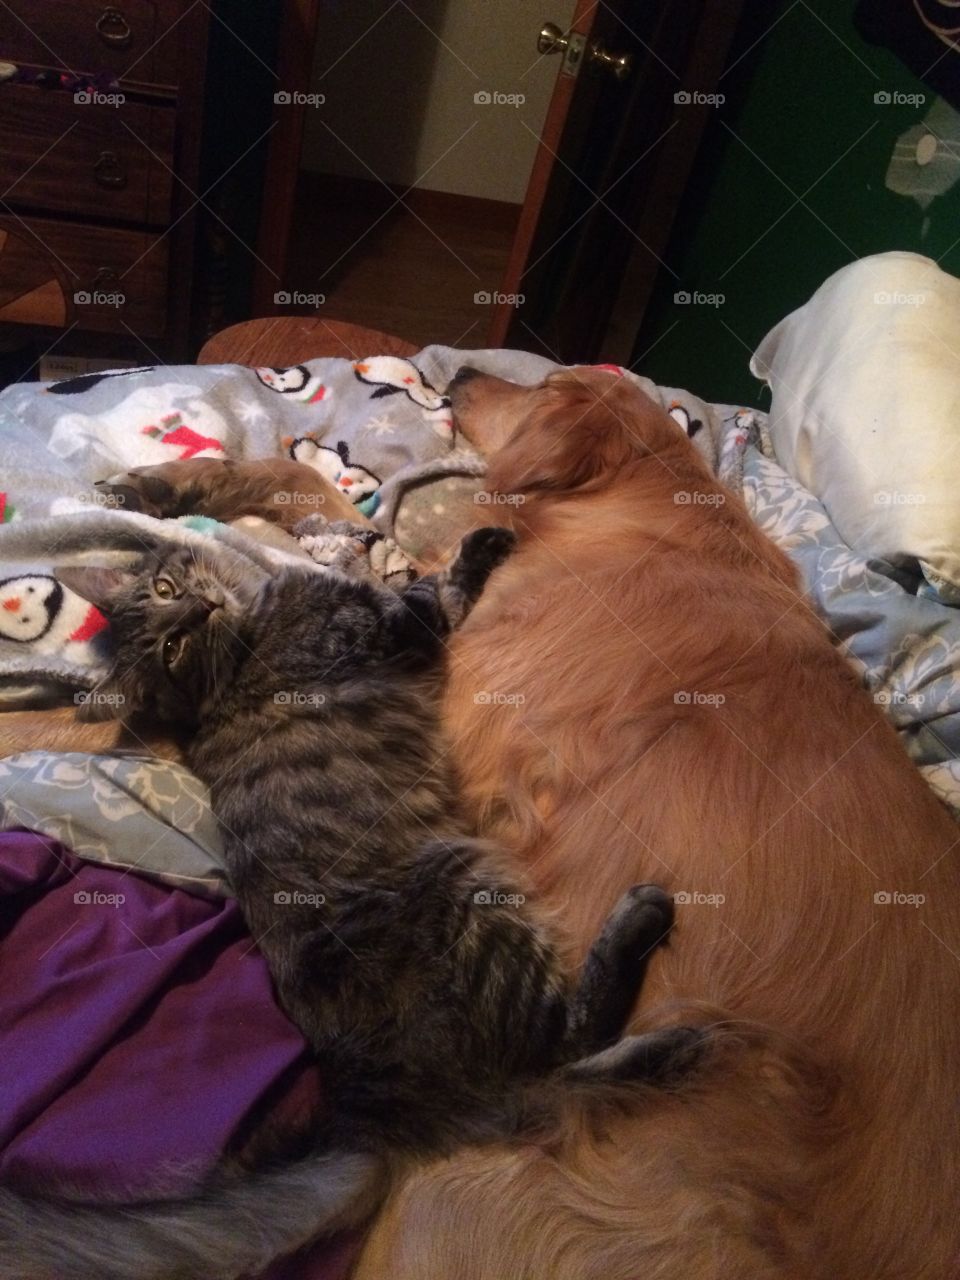 They love each other